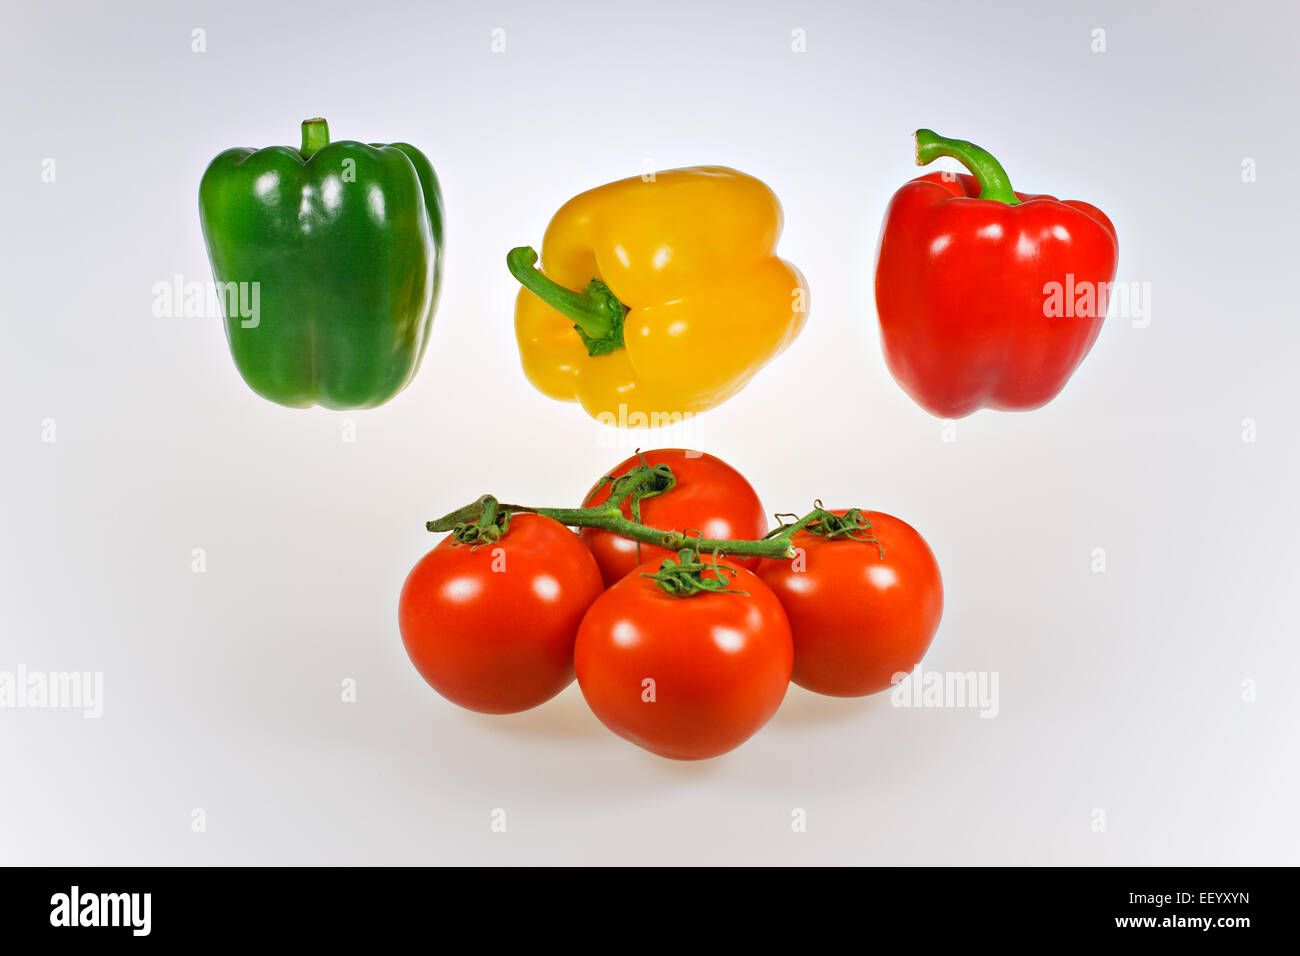 Peppers and tomatoes. Stock Photo